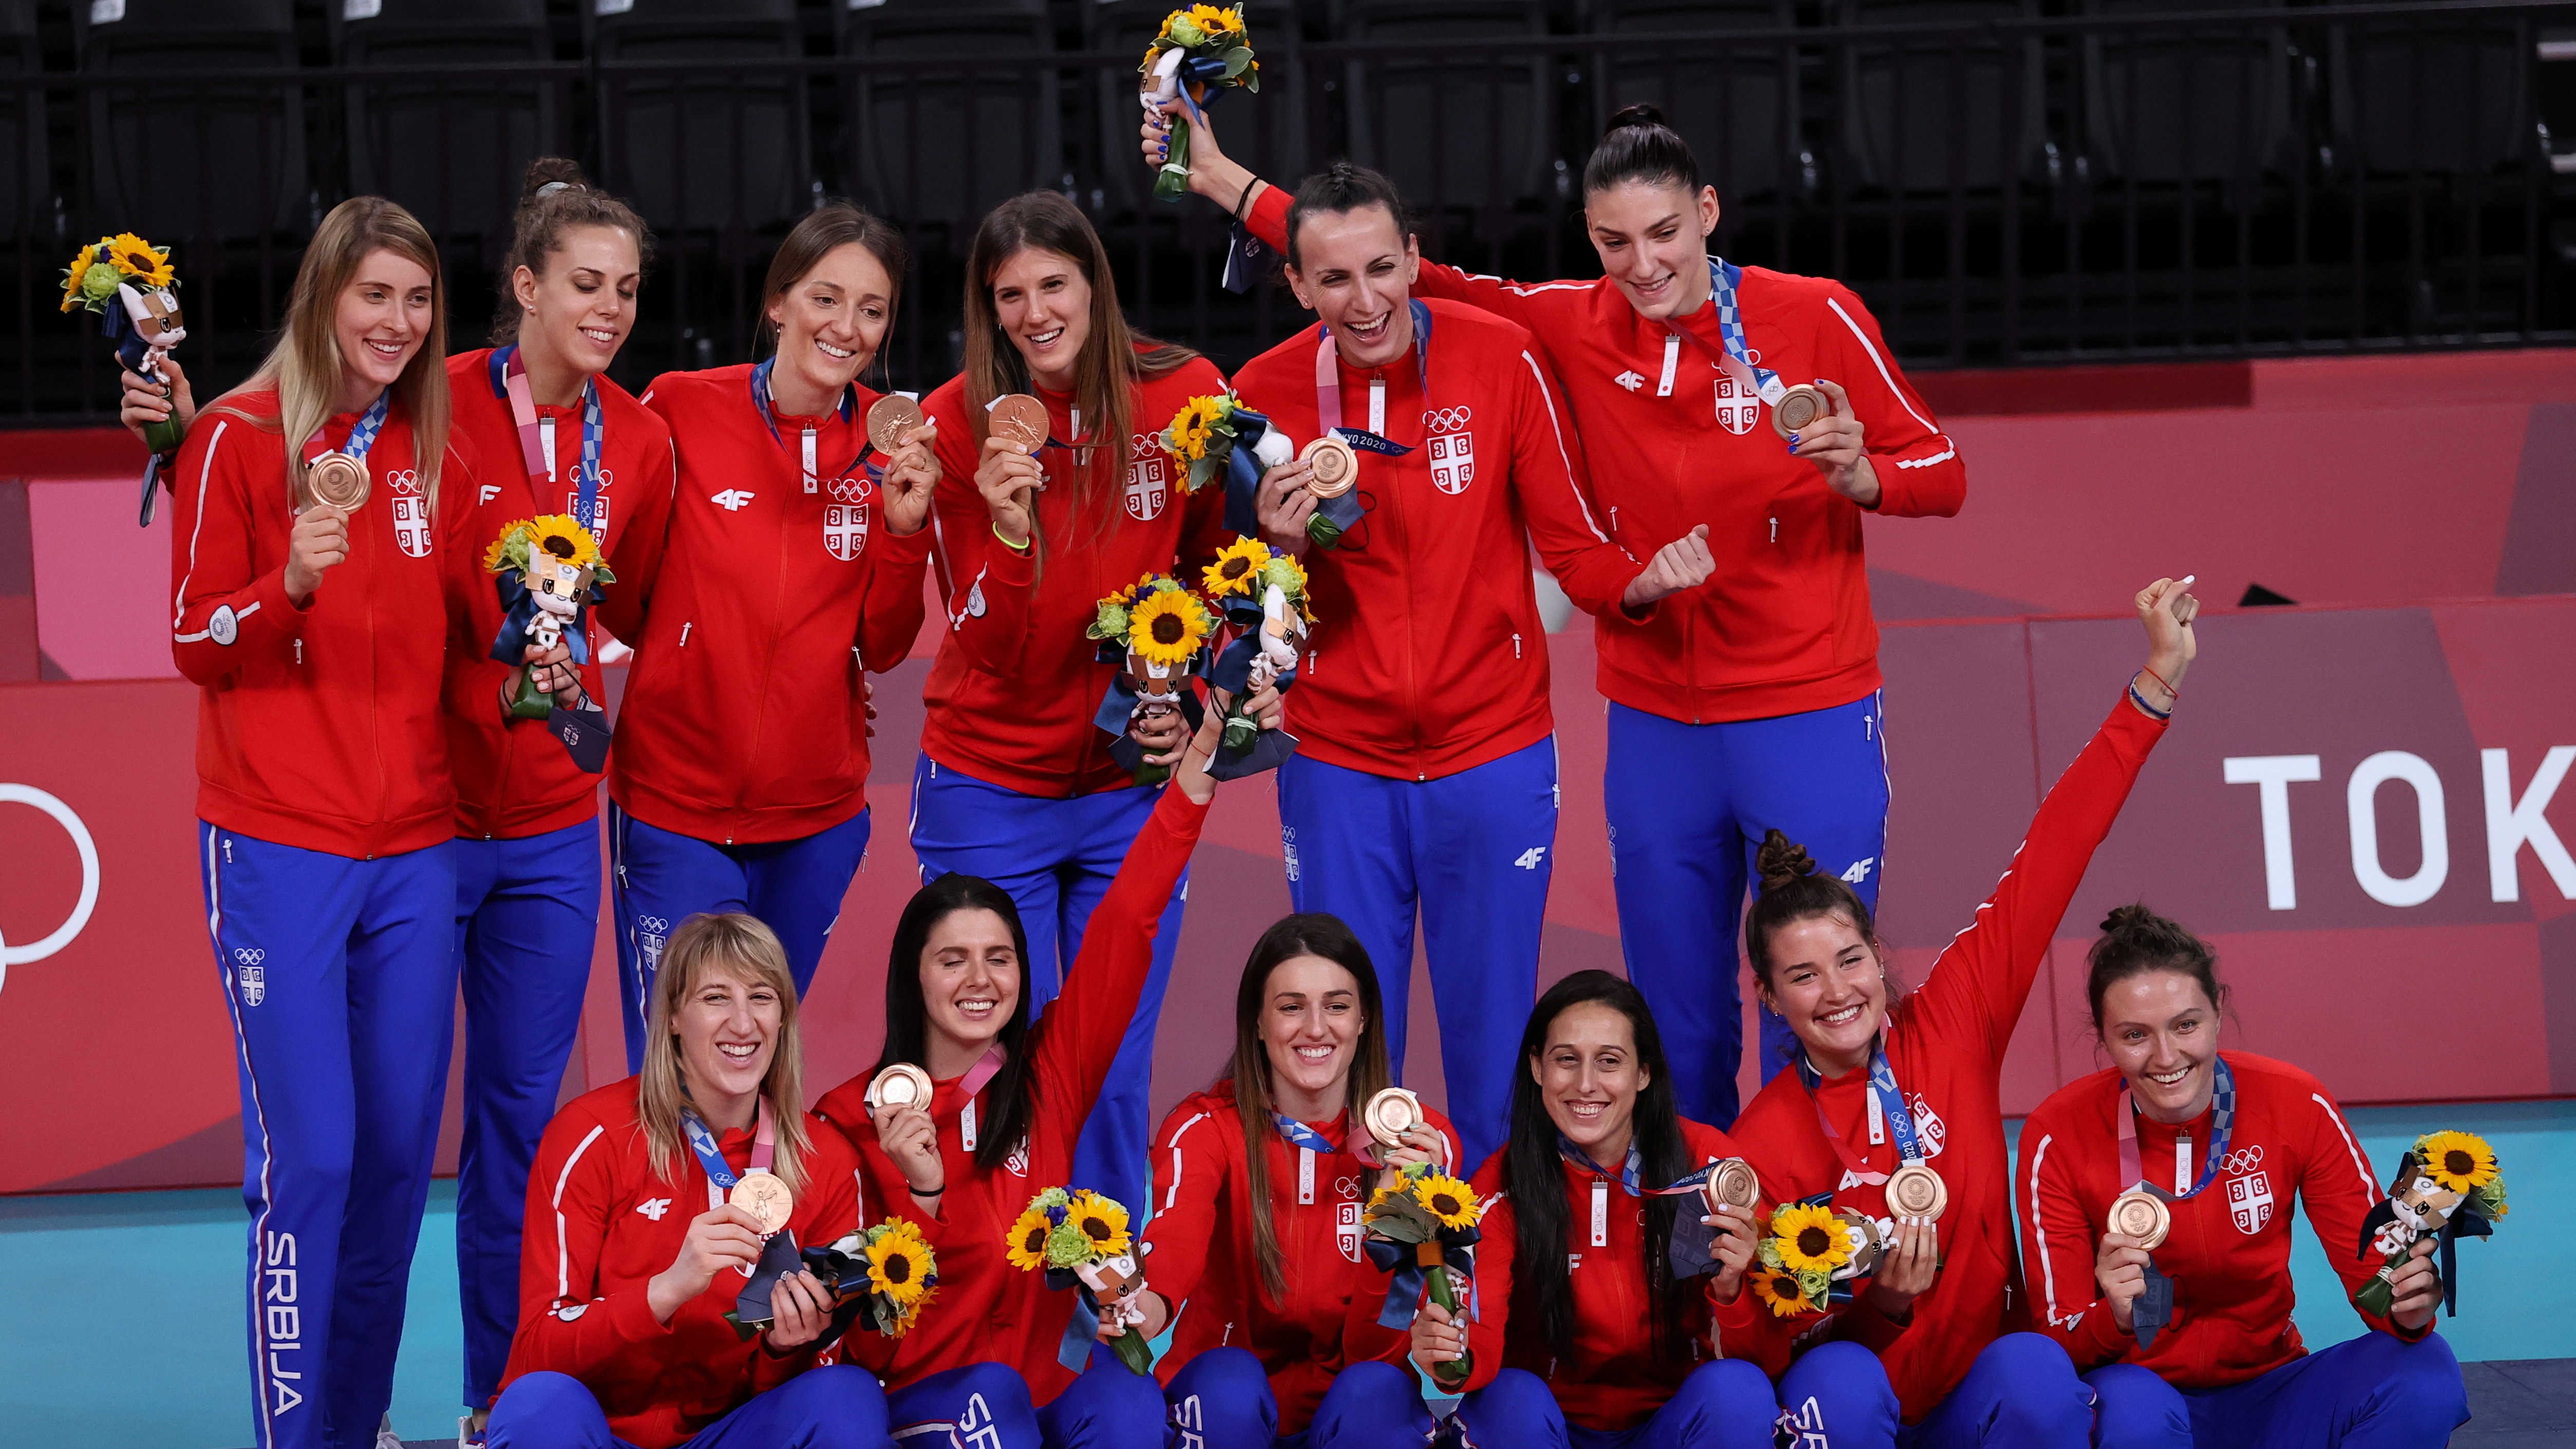 Tokyo 2020 Olympics - Volleyball - Women - Medal Ceremony - Ariake Arena, Tokyo, Japan – August 8, 2021. Team members of Serbia pose with their bronze medals after the match. REUTERS/Ivan Alvarado